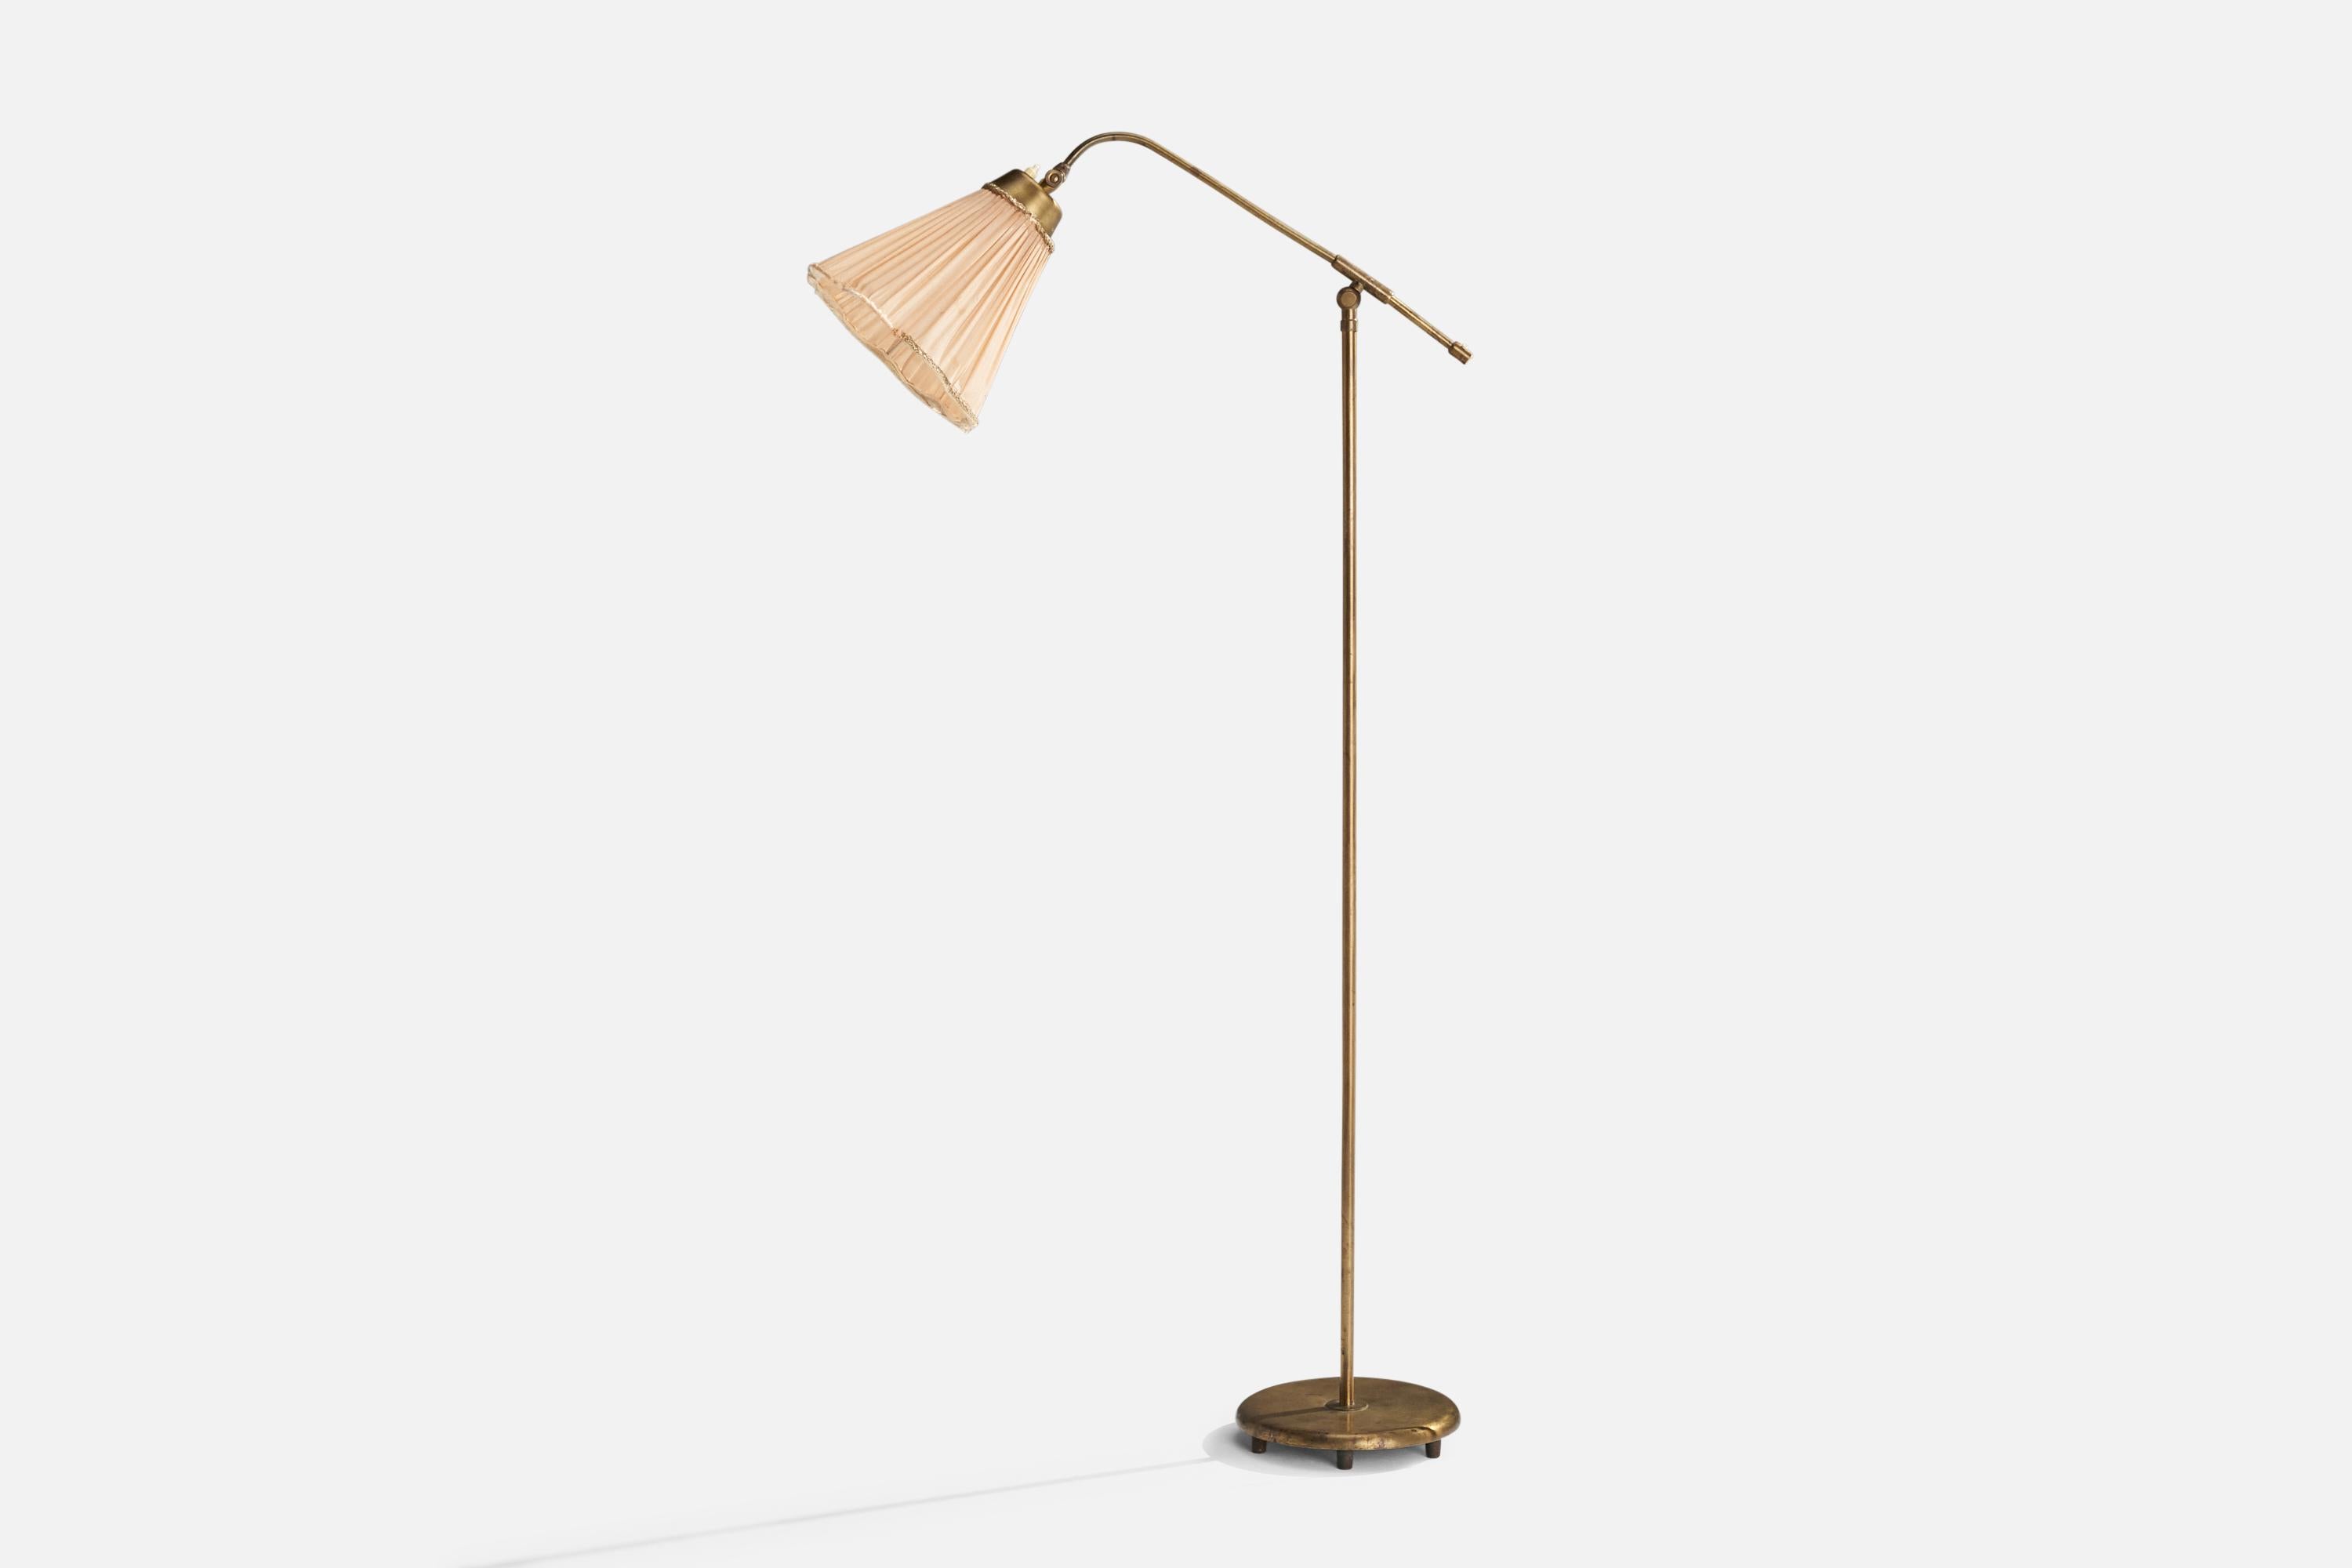 An adjustable brass and orange fabric floor lamp produced by Böhlmarks, Sweden, 1940s.

Dimensions variable 
Overall Dimensions (inches): 52.25” H x 9.25” W x 26.5” D
Stated dimensions include shade.
Bulb Specifications: E-26 Bulb
Number of Sockets: